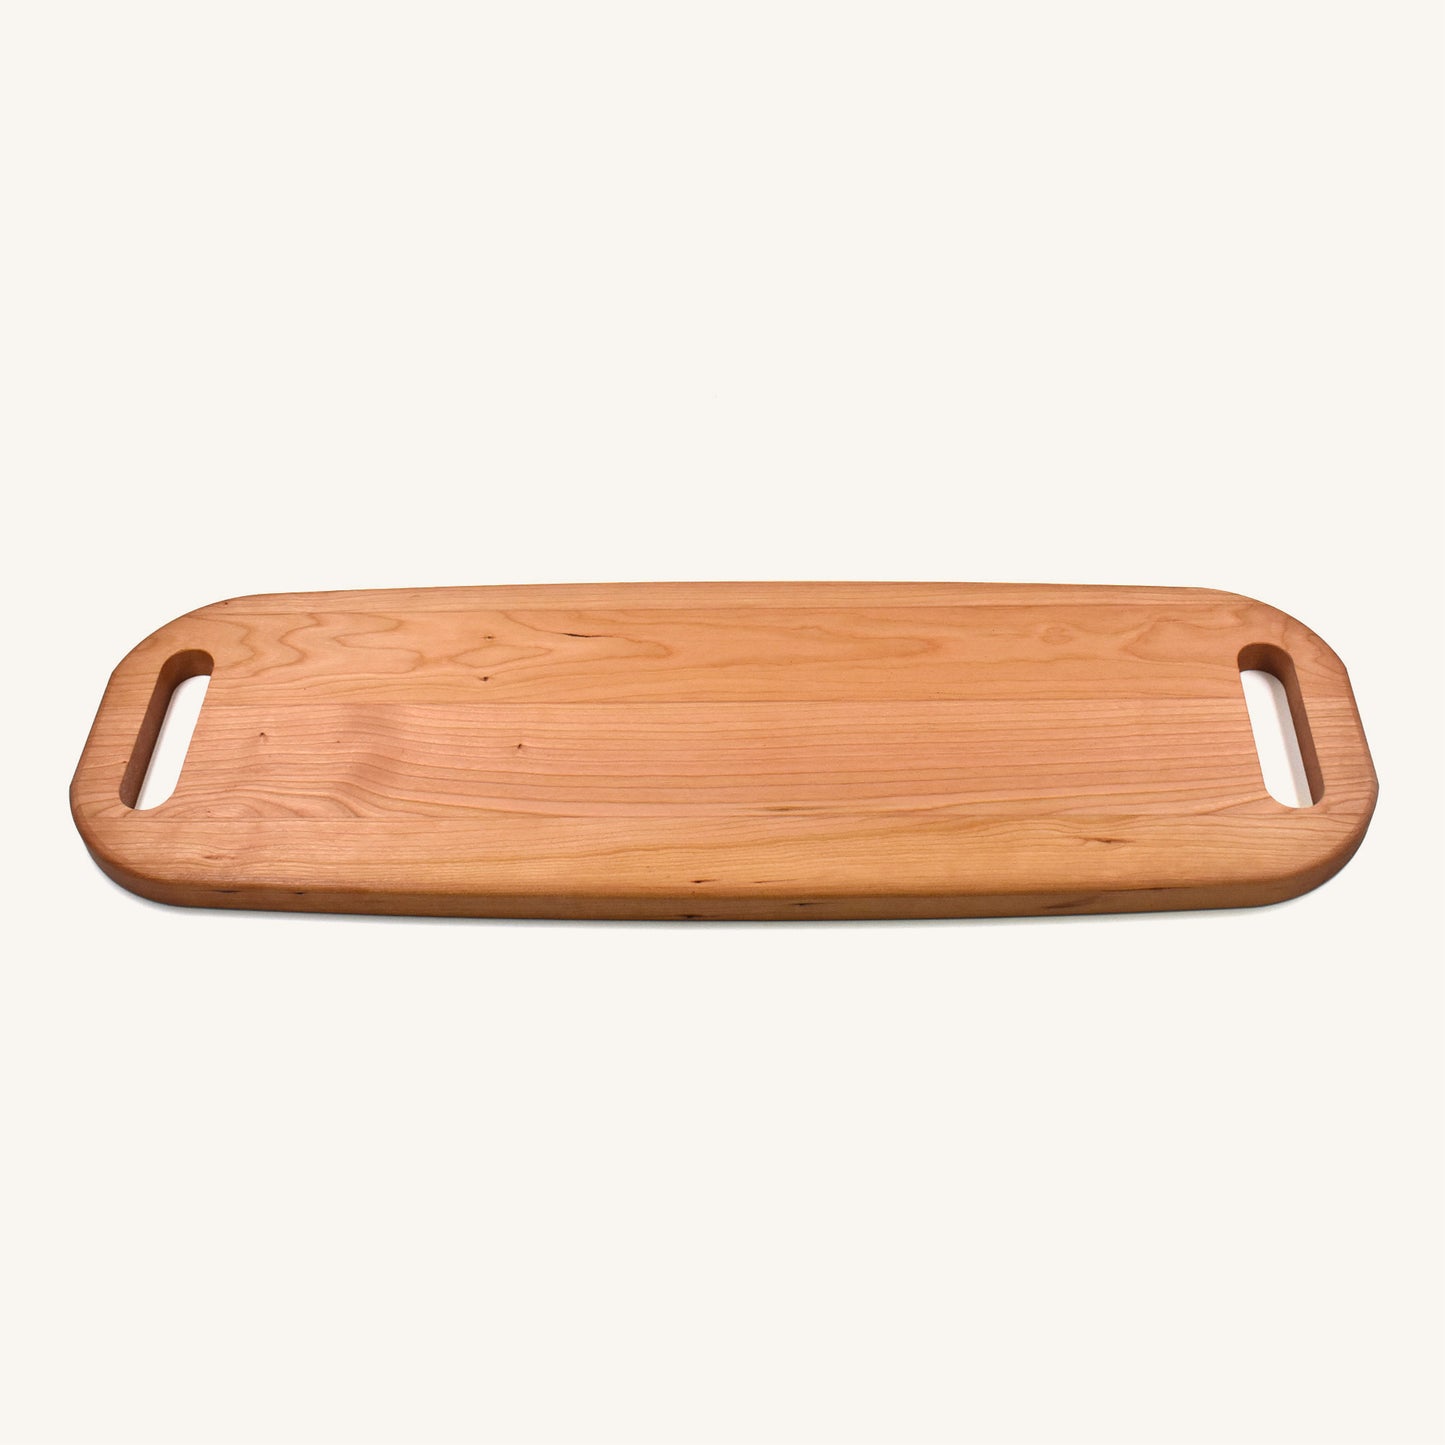 Large Professional Catering Charcuterie Tray with Handles on Both Ends